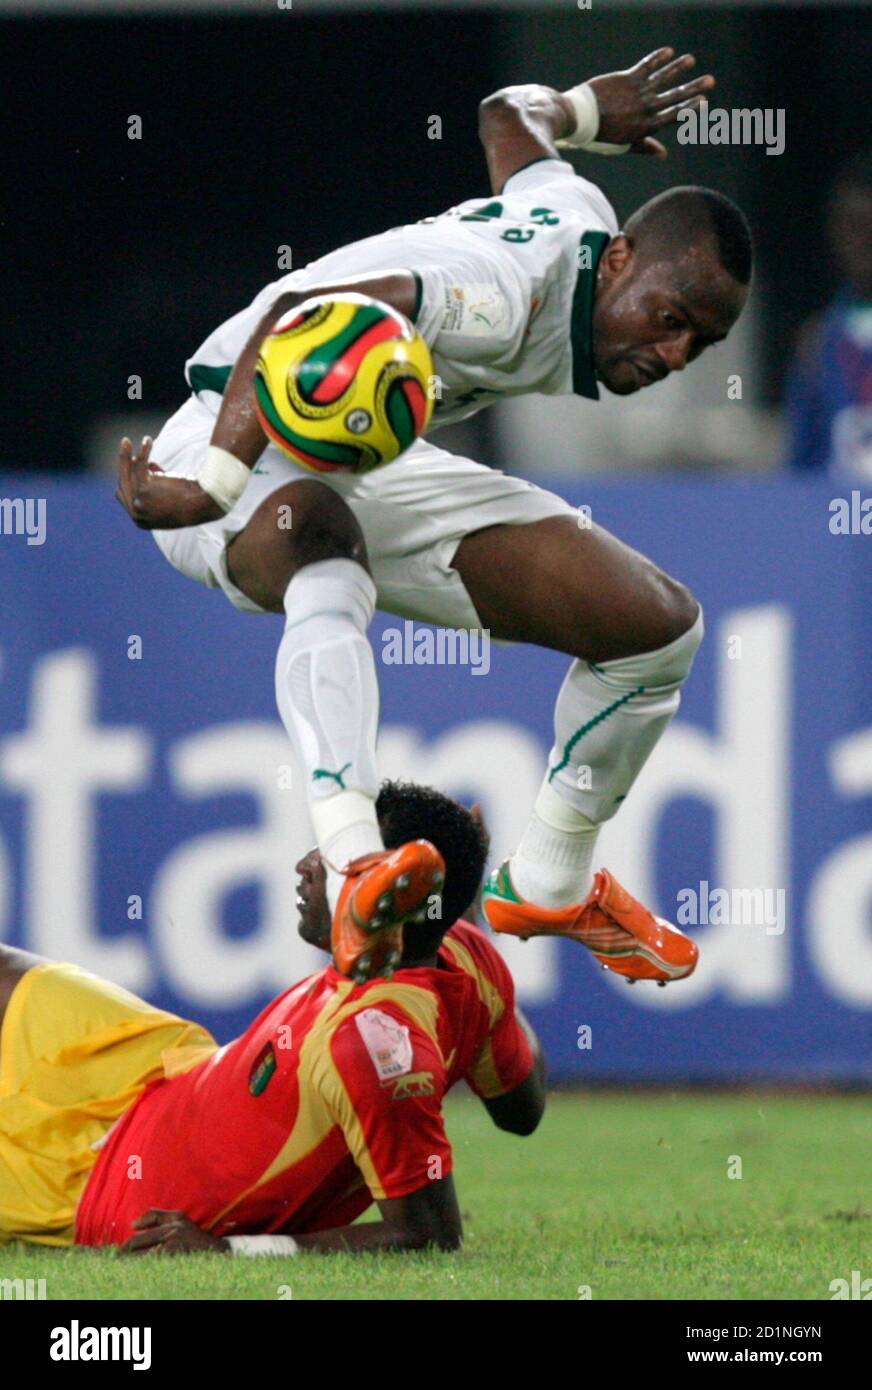 Ivory Coast's Didier Zokora (top) challenges Guinea's Mohamed Sacko during their  African Nations Cup quarter-final soccer match in Sekondi February 3, 2008. REUTERS/Siphiwe Sibeko (GHANA) Stock Photo